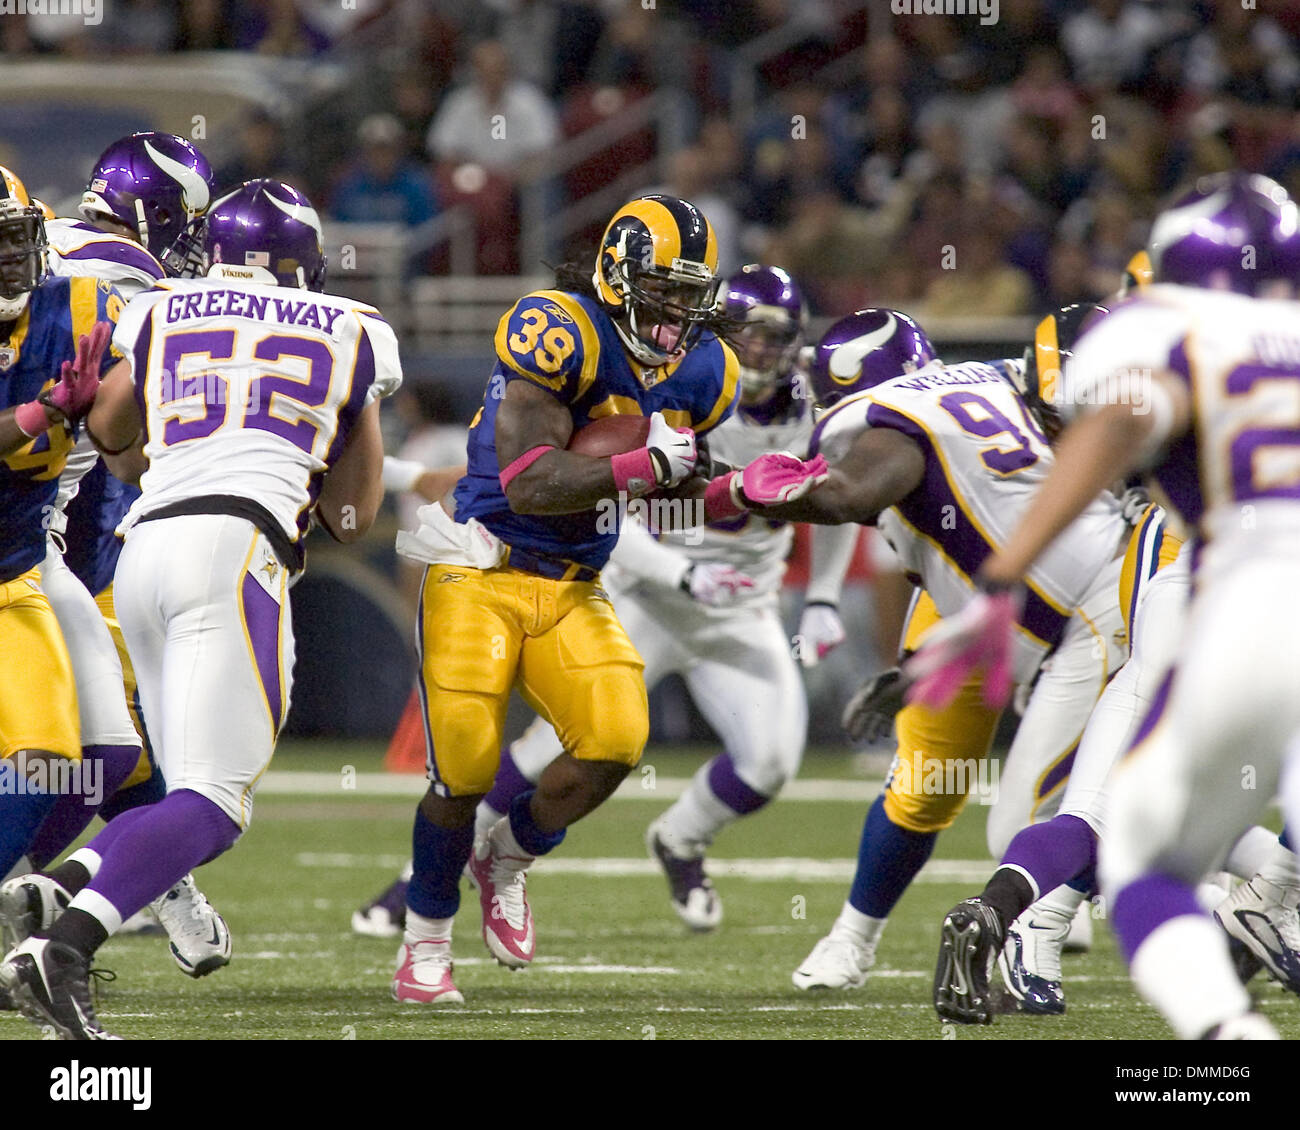 Oct 11, 2009 - St Louis, Missouri, USA - NFL Football - Rams running back STEVEN JACKSON carries the ball in the game between the St Louis Rams and the Minnesota Vikings at the Edward Jones Dome.  The Vikings defeated the Rams 38 to 10.   (Credit Image: © Mike Granse/ZUMA Press) Stock Photo